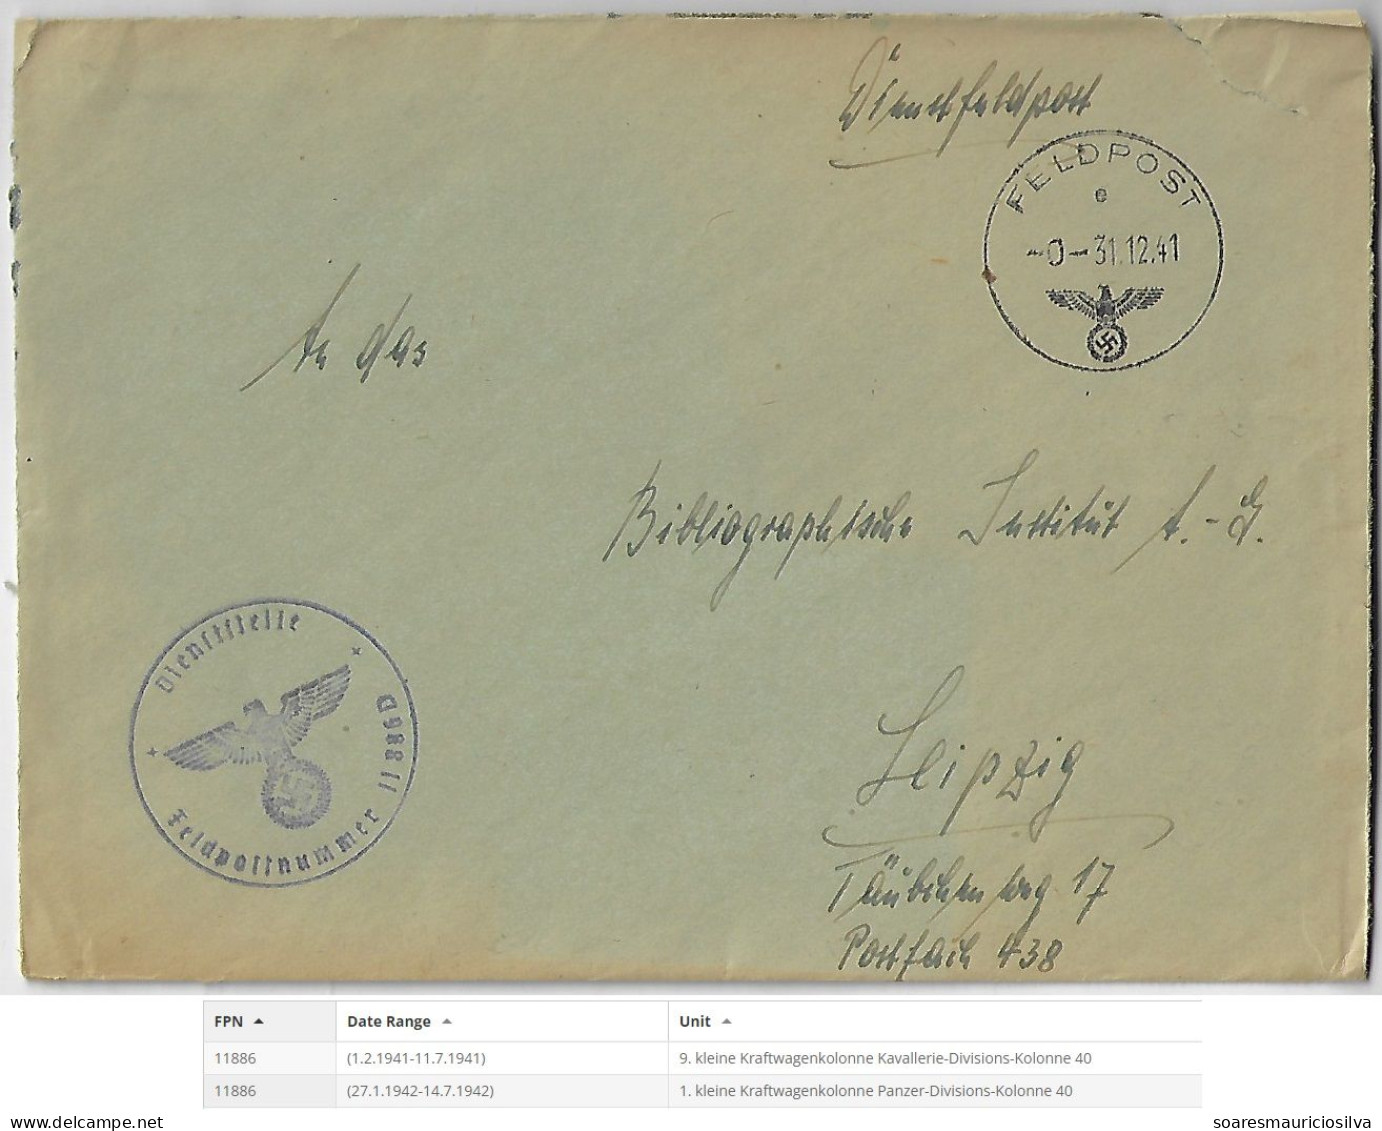 Germany 1941 Feldpost Cover Cancel Eagle Swastika Number 11886 1st Small Motor Vehicle Column Panzer Division Column 40 - Feldpost 2e Guerre Mondiale